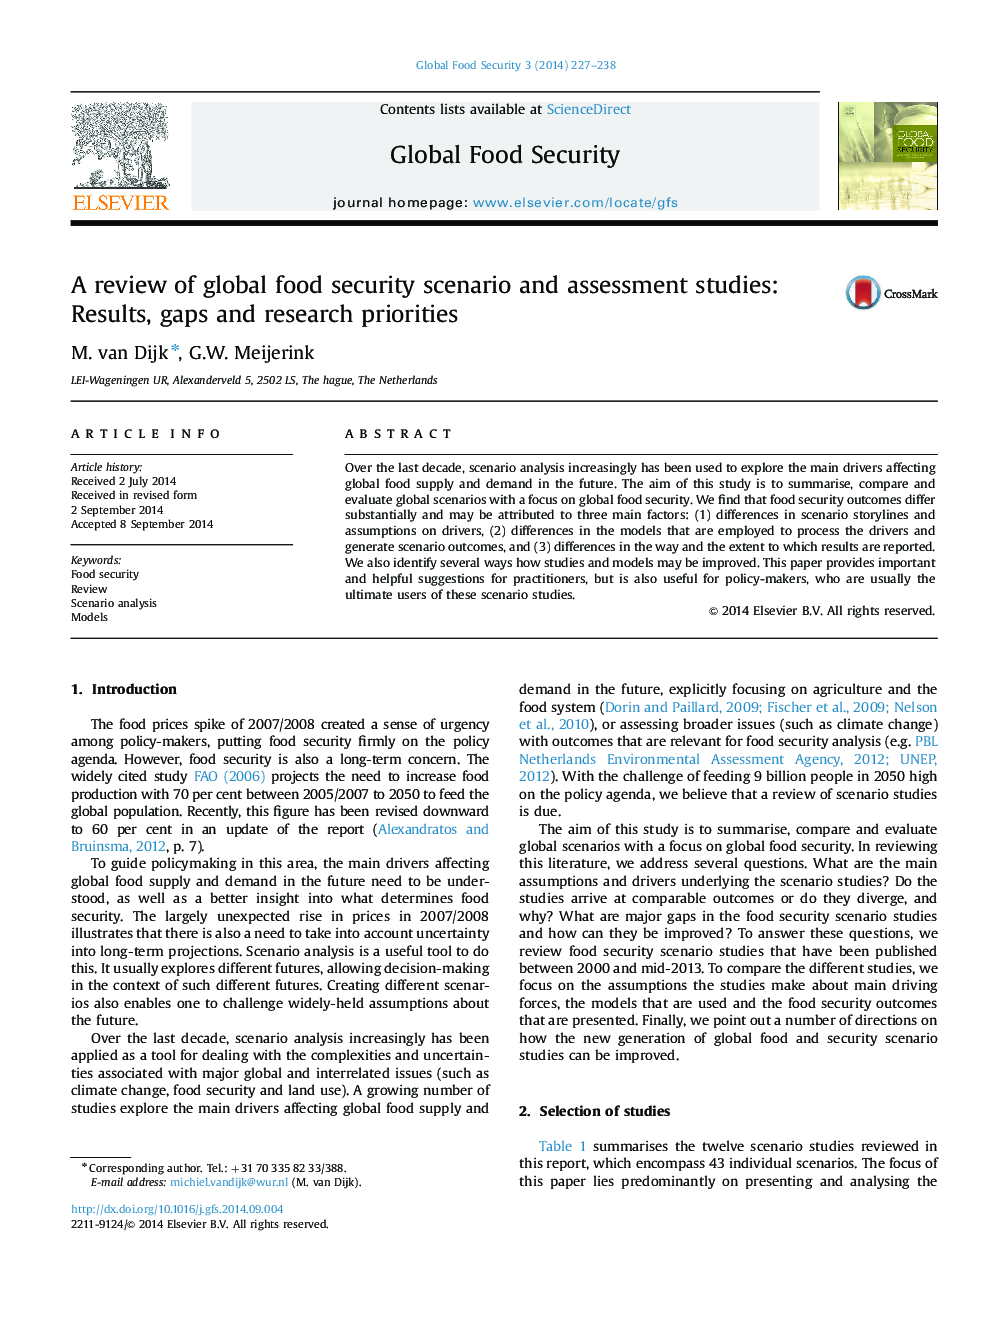 A review of global food security scenario and assessment studies: Results, gaps and research priorities